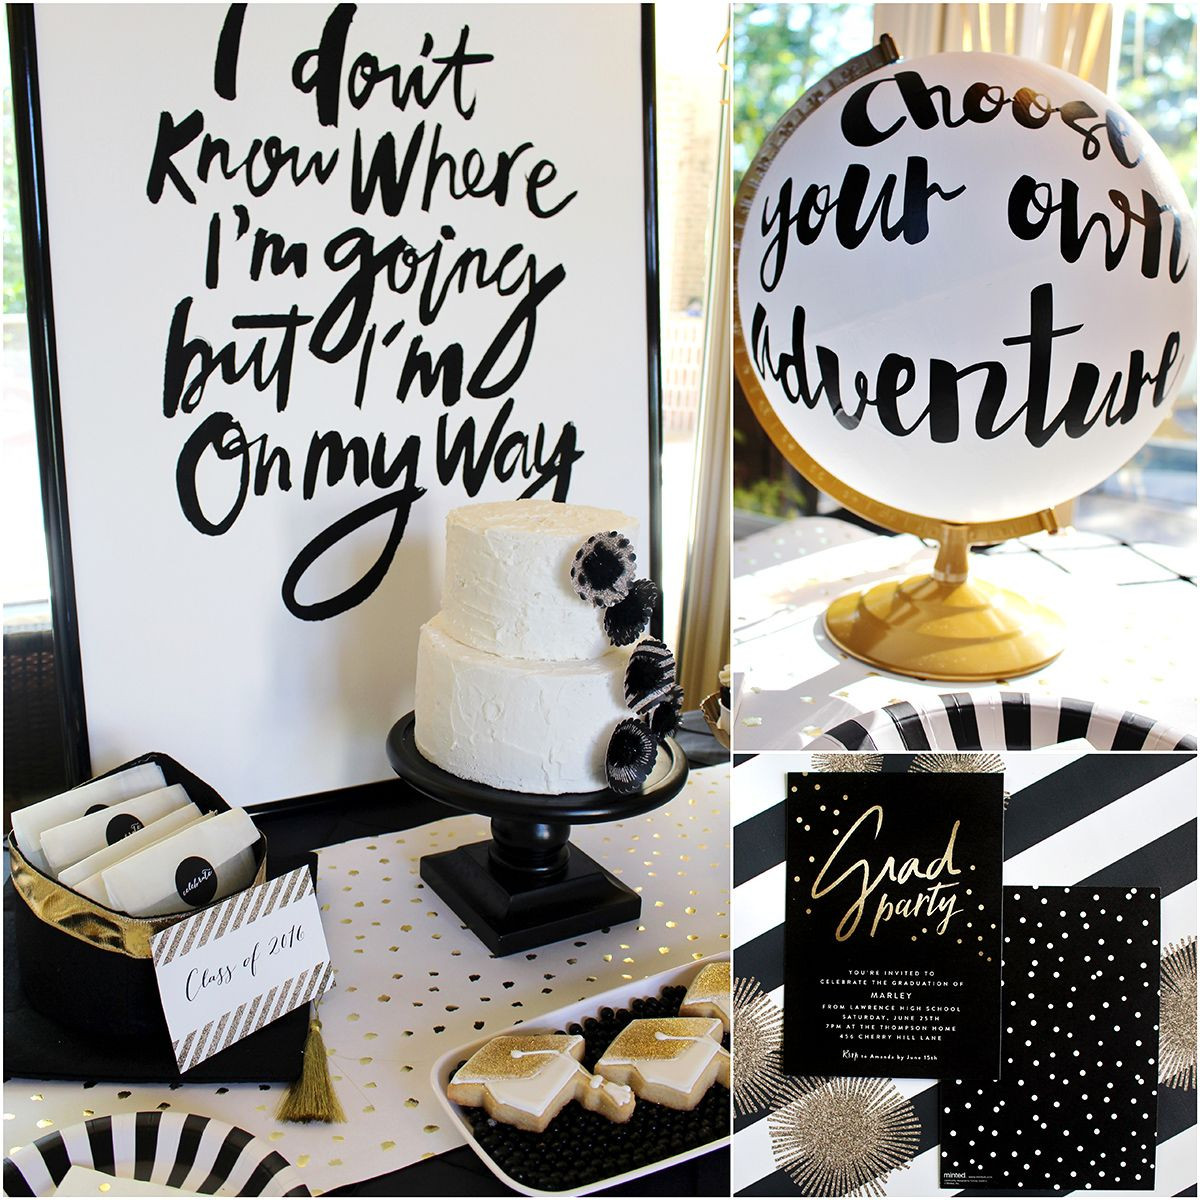 High School Graduation Party Theme Ideas
 Pin by Janet Ridings on Graduation Open House